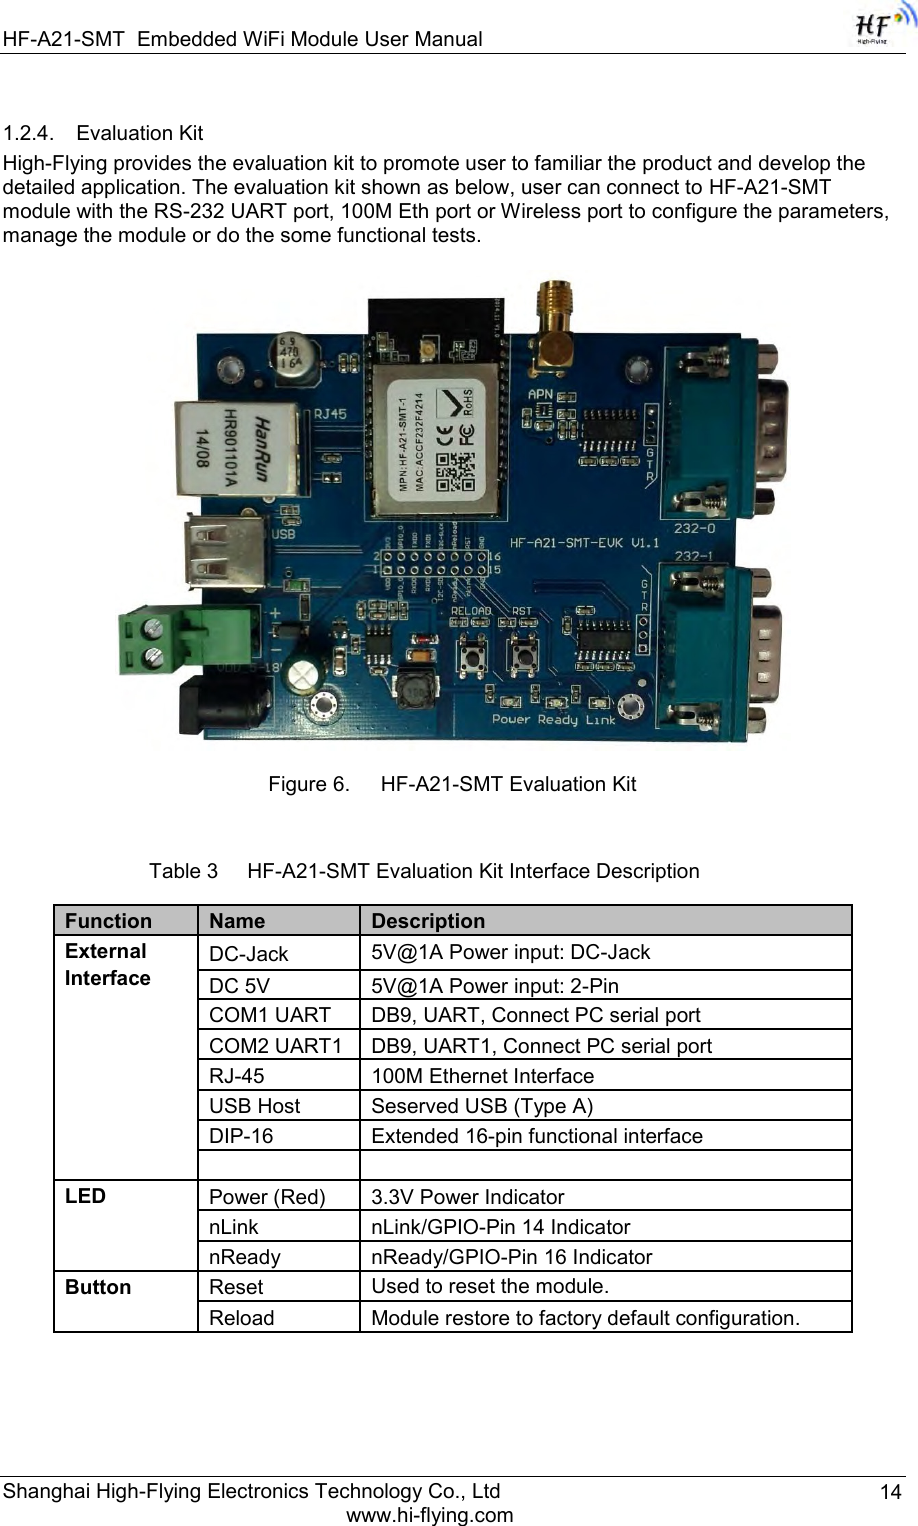 HF-A21-SMT Embedded WiFi Module User Manual Shanghai High-Flying Electronics Technology Co., Ltd www.hi-flying.com 14 1.2.4. Evaluation Kit High-Flying provides the evaluation kit to promote user to familiar the product and develop the detailed application. The evaluation kit shown as below, user can connect to HF-A21-SMT module with the RS-232 UART port, 100M Eth port or Wireless port to configure the parameters, manage the module or do the some functional tests.   Figure 6. HF-A21-SMT Evaluation Kit Table 3     HF-A21-SMT Evaluation Kit Interface Description Function  Name  Description External Interface DC-Jack  5V@1A Power input: DC-Jack DC 5V  5V@1A Power input: 2-Pin COM1 UART  DB9, UART, Connect PC serial port COM2 UART1  DB9, UART1, Connect PC serial port RJ-45  100M Ethernet Interface USB Host  Seserved USB (Type A) DIP-16  Extended 16-pin functional interface    LED  Power (Red)  3.3V Power Indicator nLink  nLink/GPIO-Pin 14 Indicator nReady  nReady/GPIO-Pin 16 Indicator Button  Reset  Used to reset the module. Reload  Module restore to factory default configuration. 